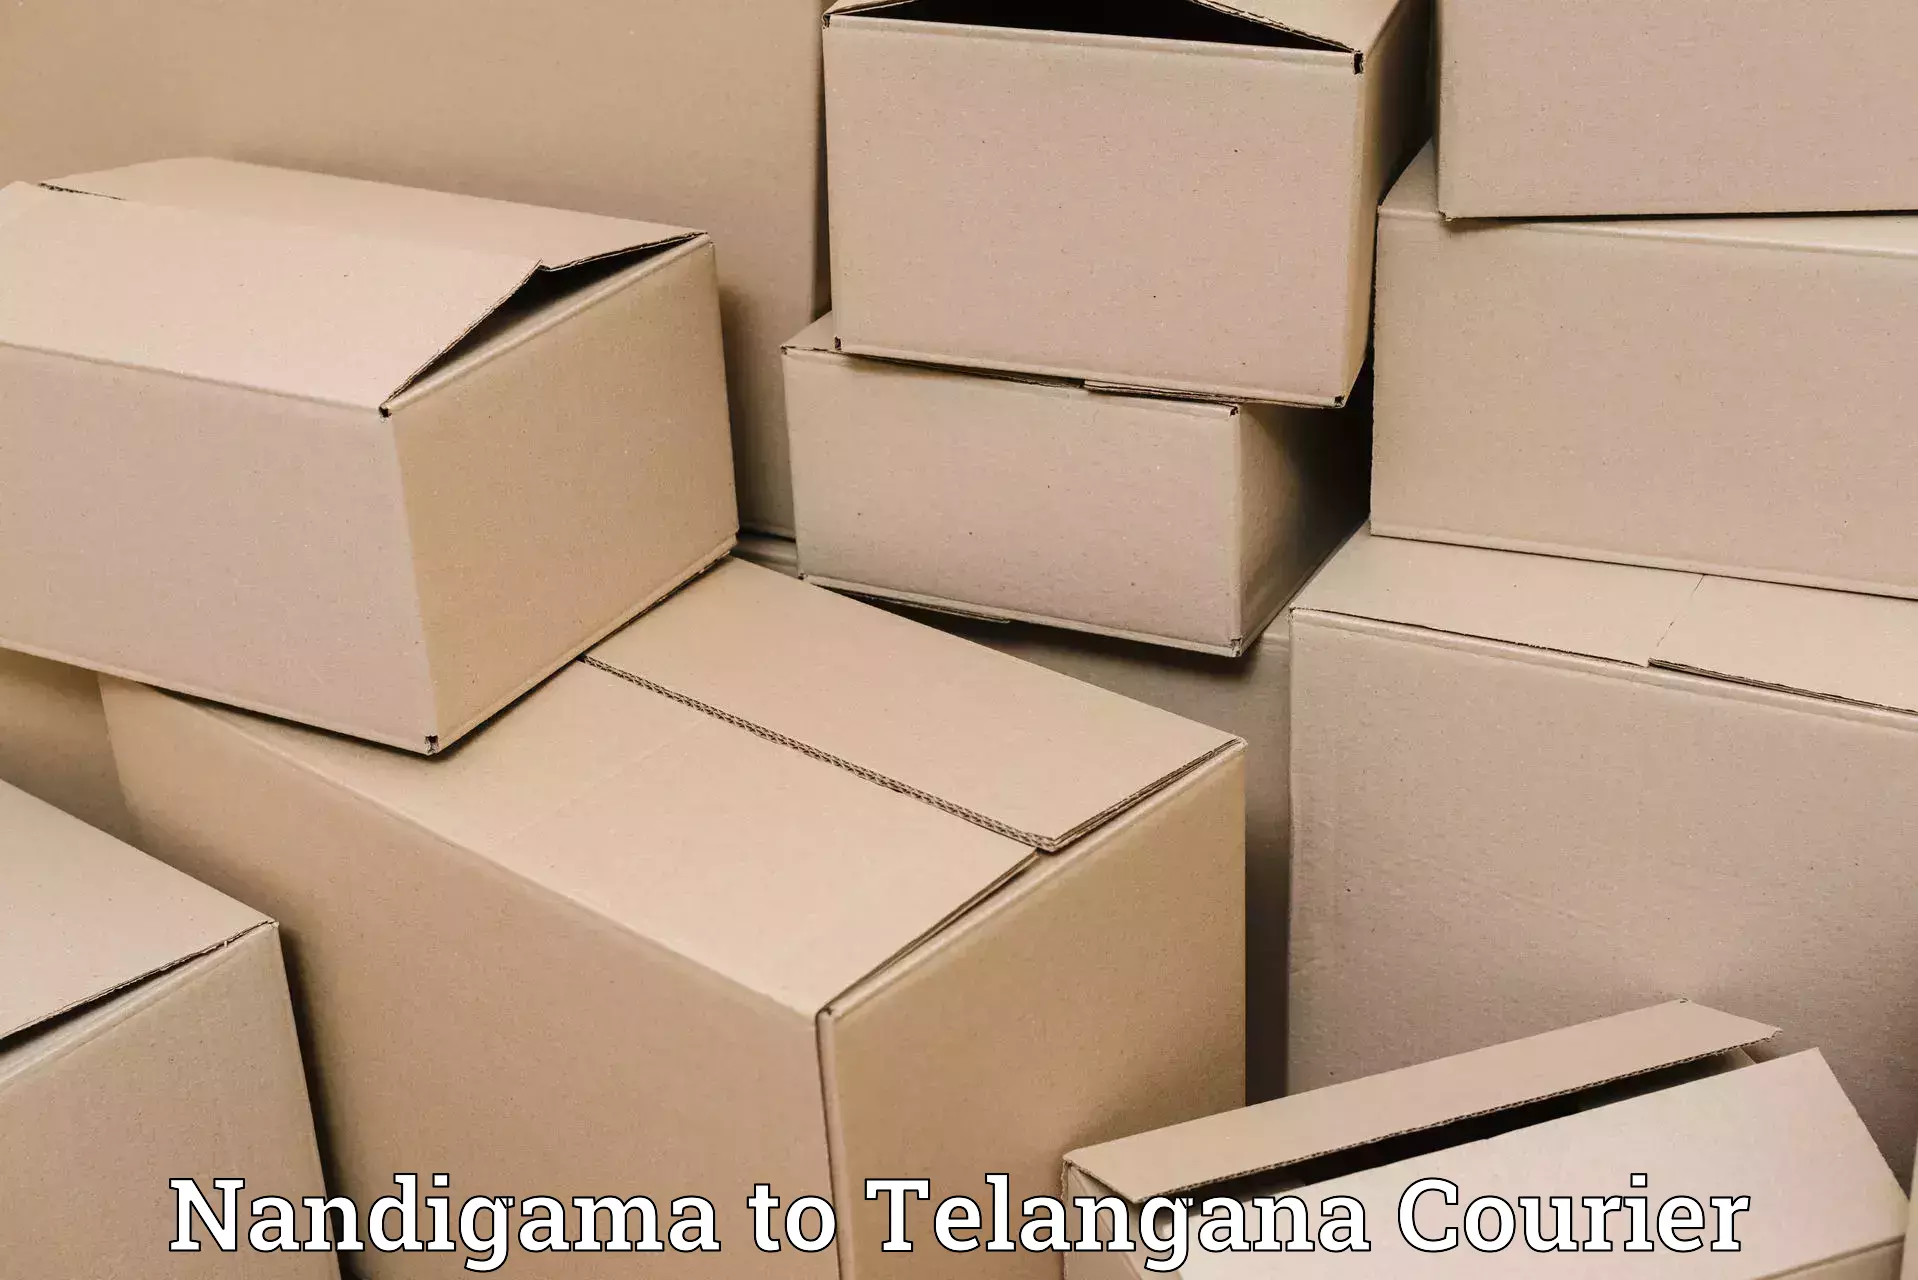 Advanced shipping network Nandigama to Mancherial